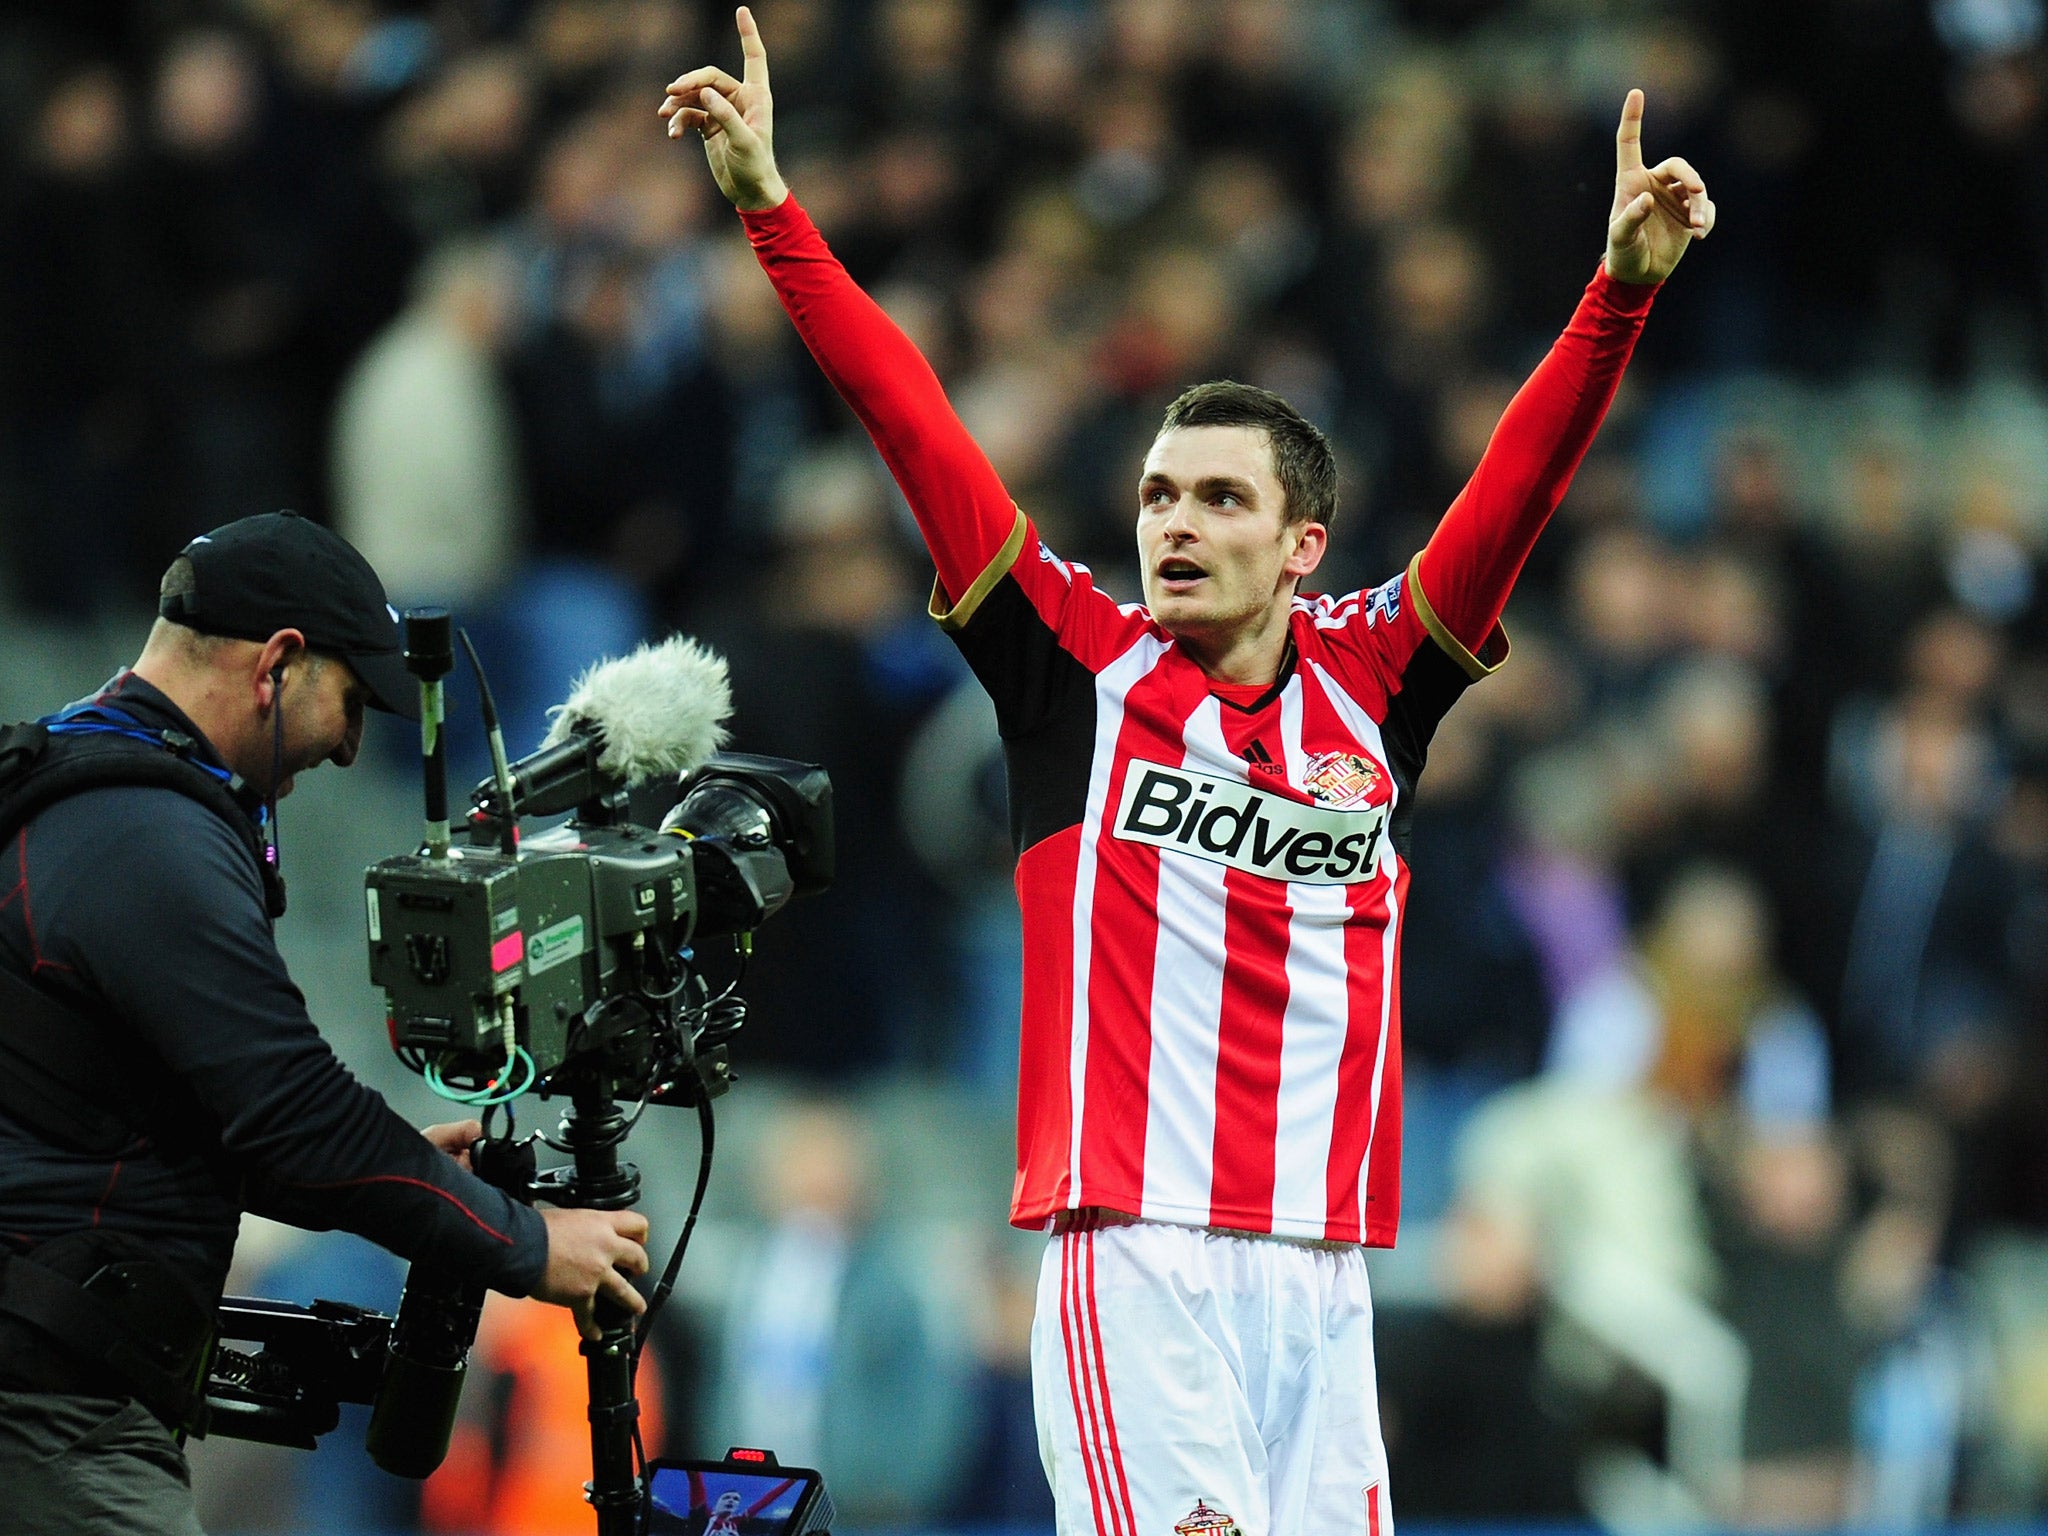 Footballer Adam Johnson sent more than 800 sexual messages to a 15-year-old girl